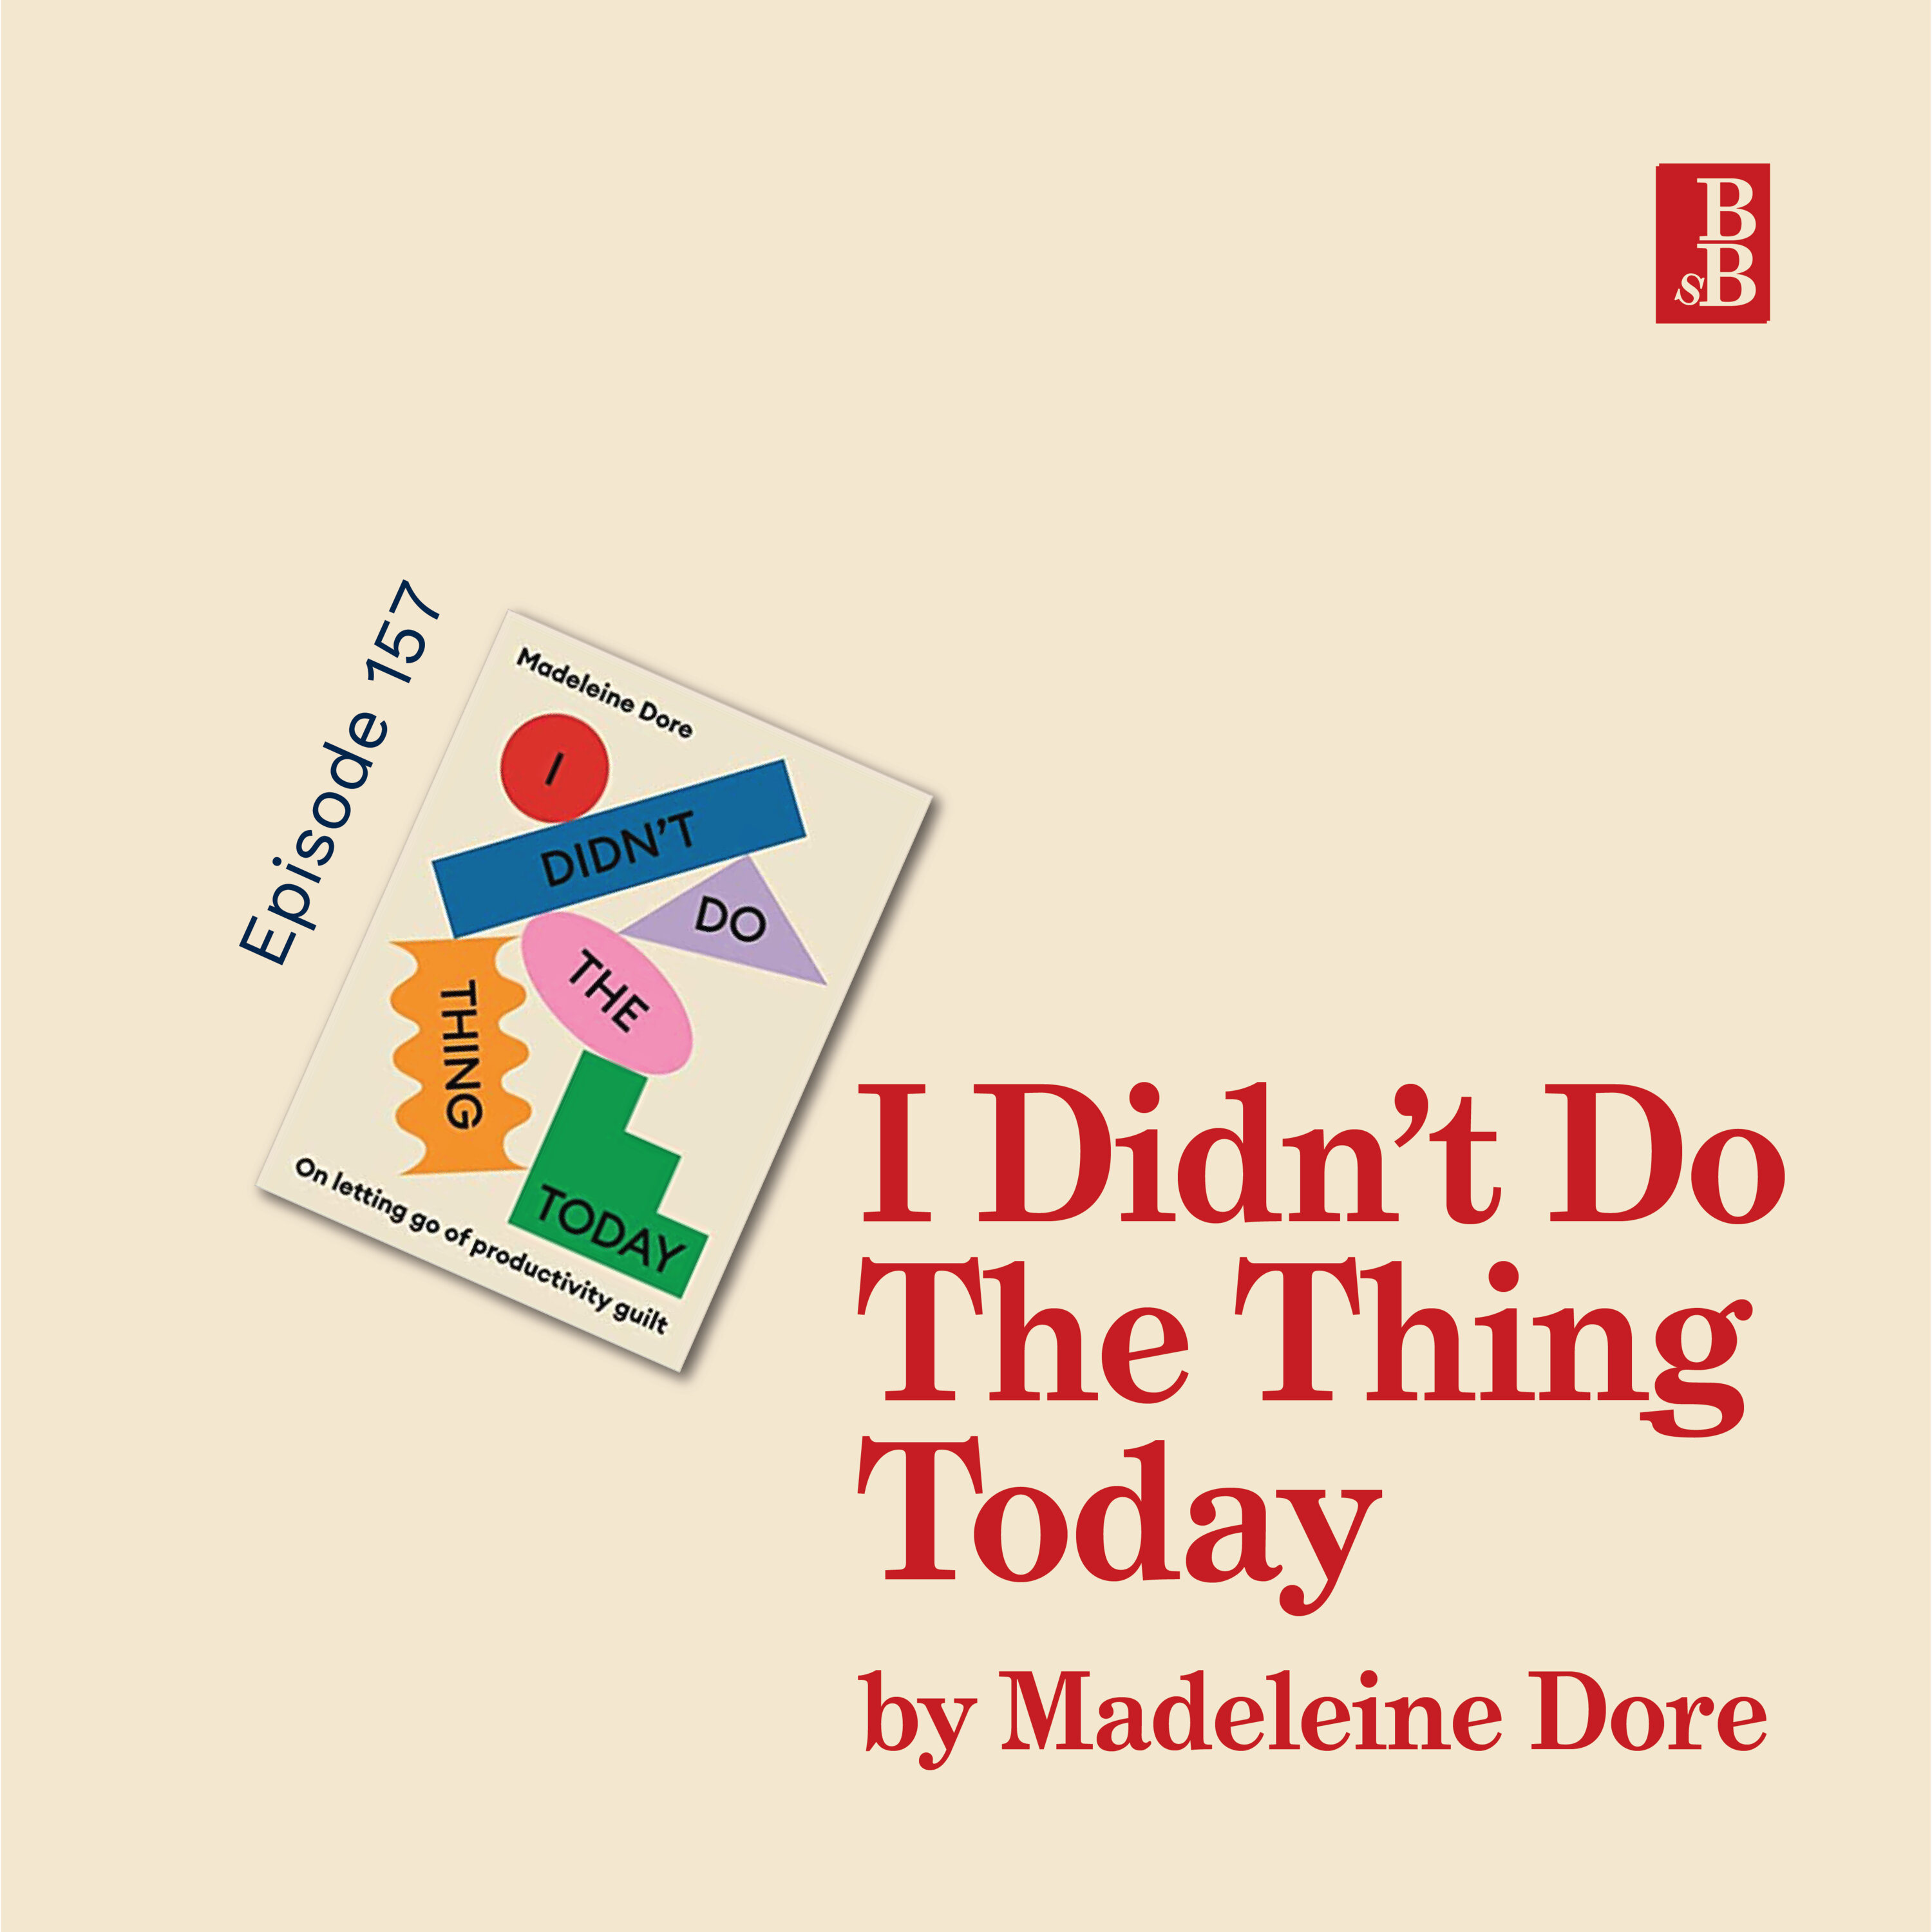 I Didn't Do The Thing Today by Madeleine Dore: why productivity is not the meaning of life Image